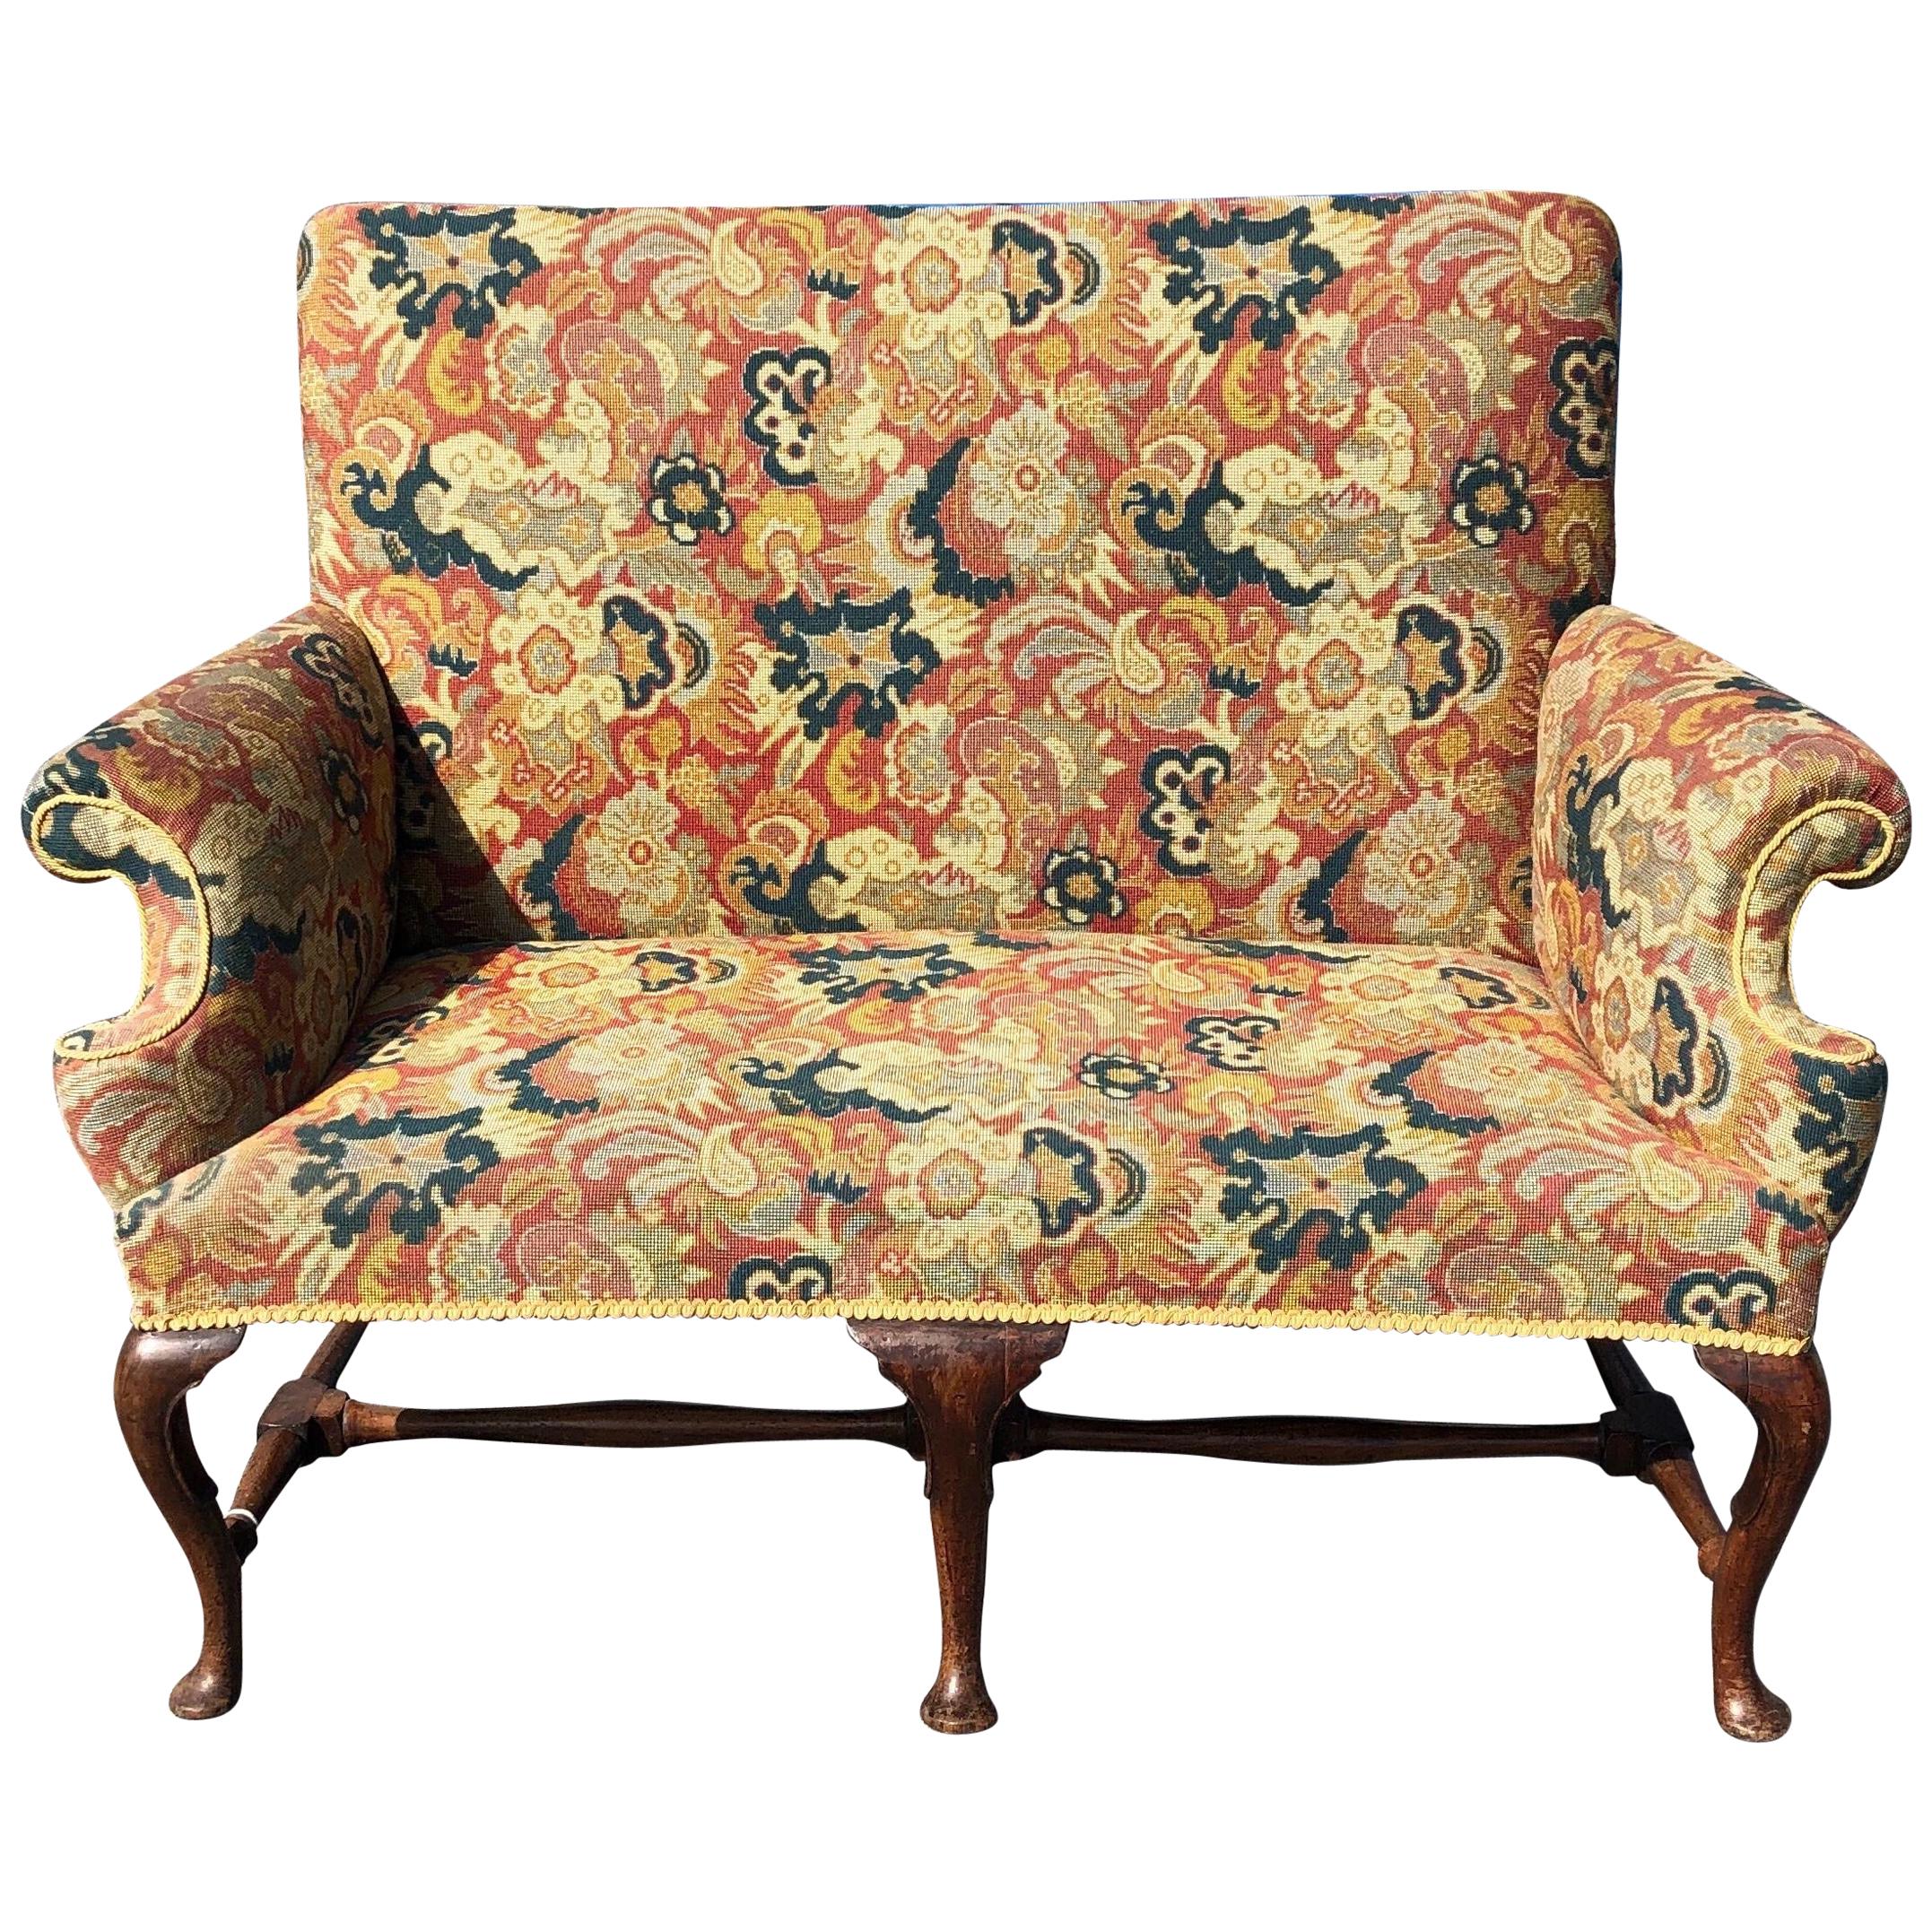 19th Century English Upholstered Settee